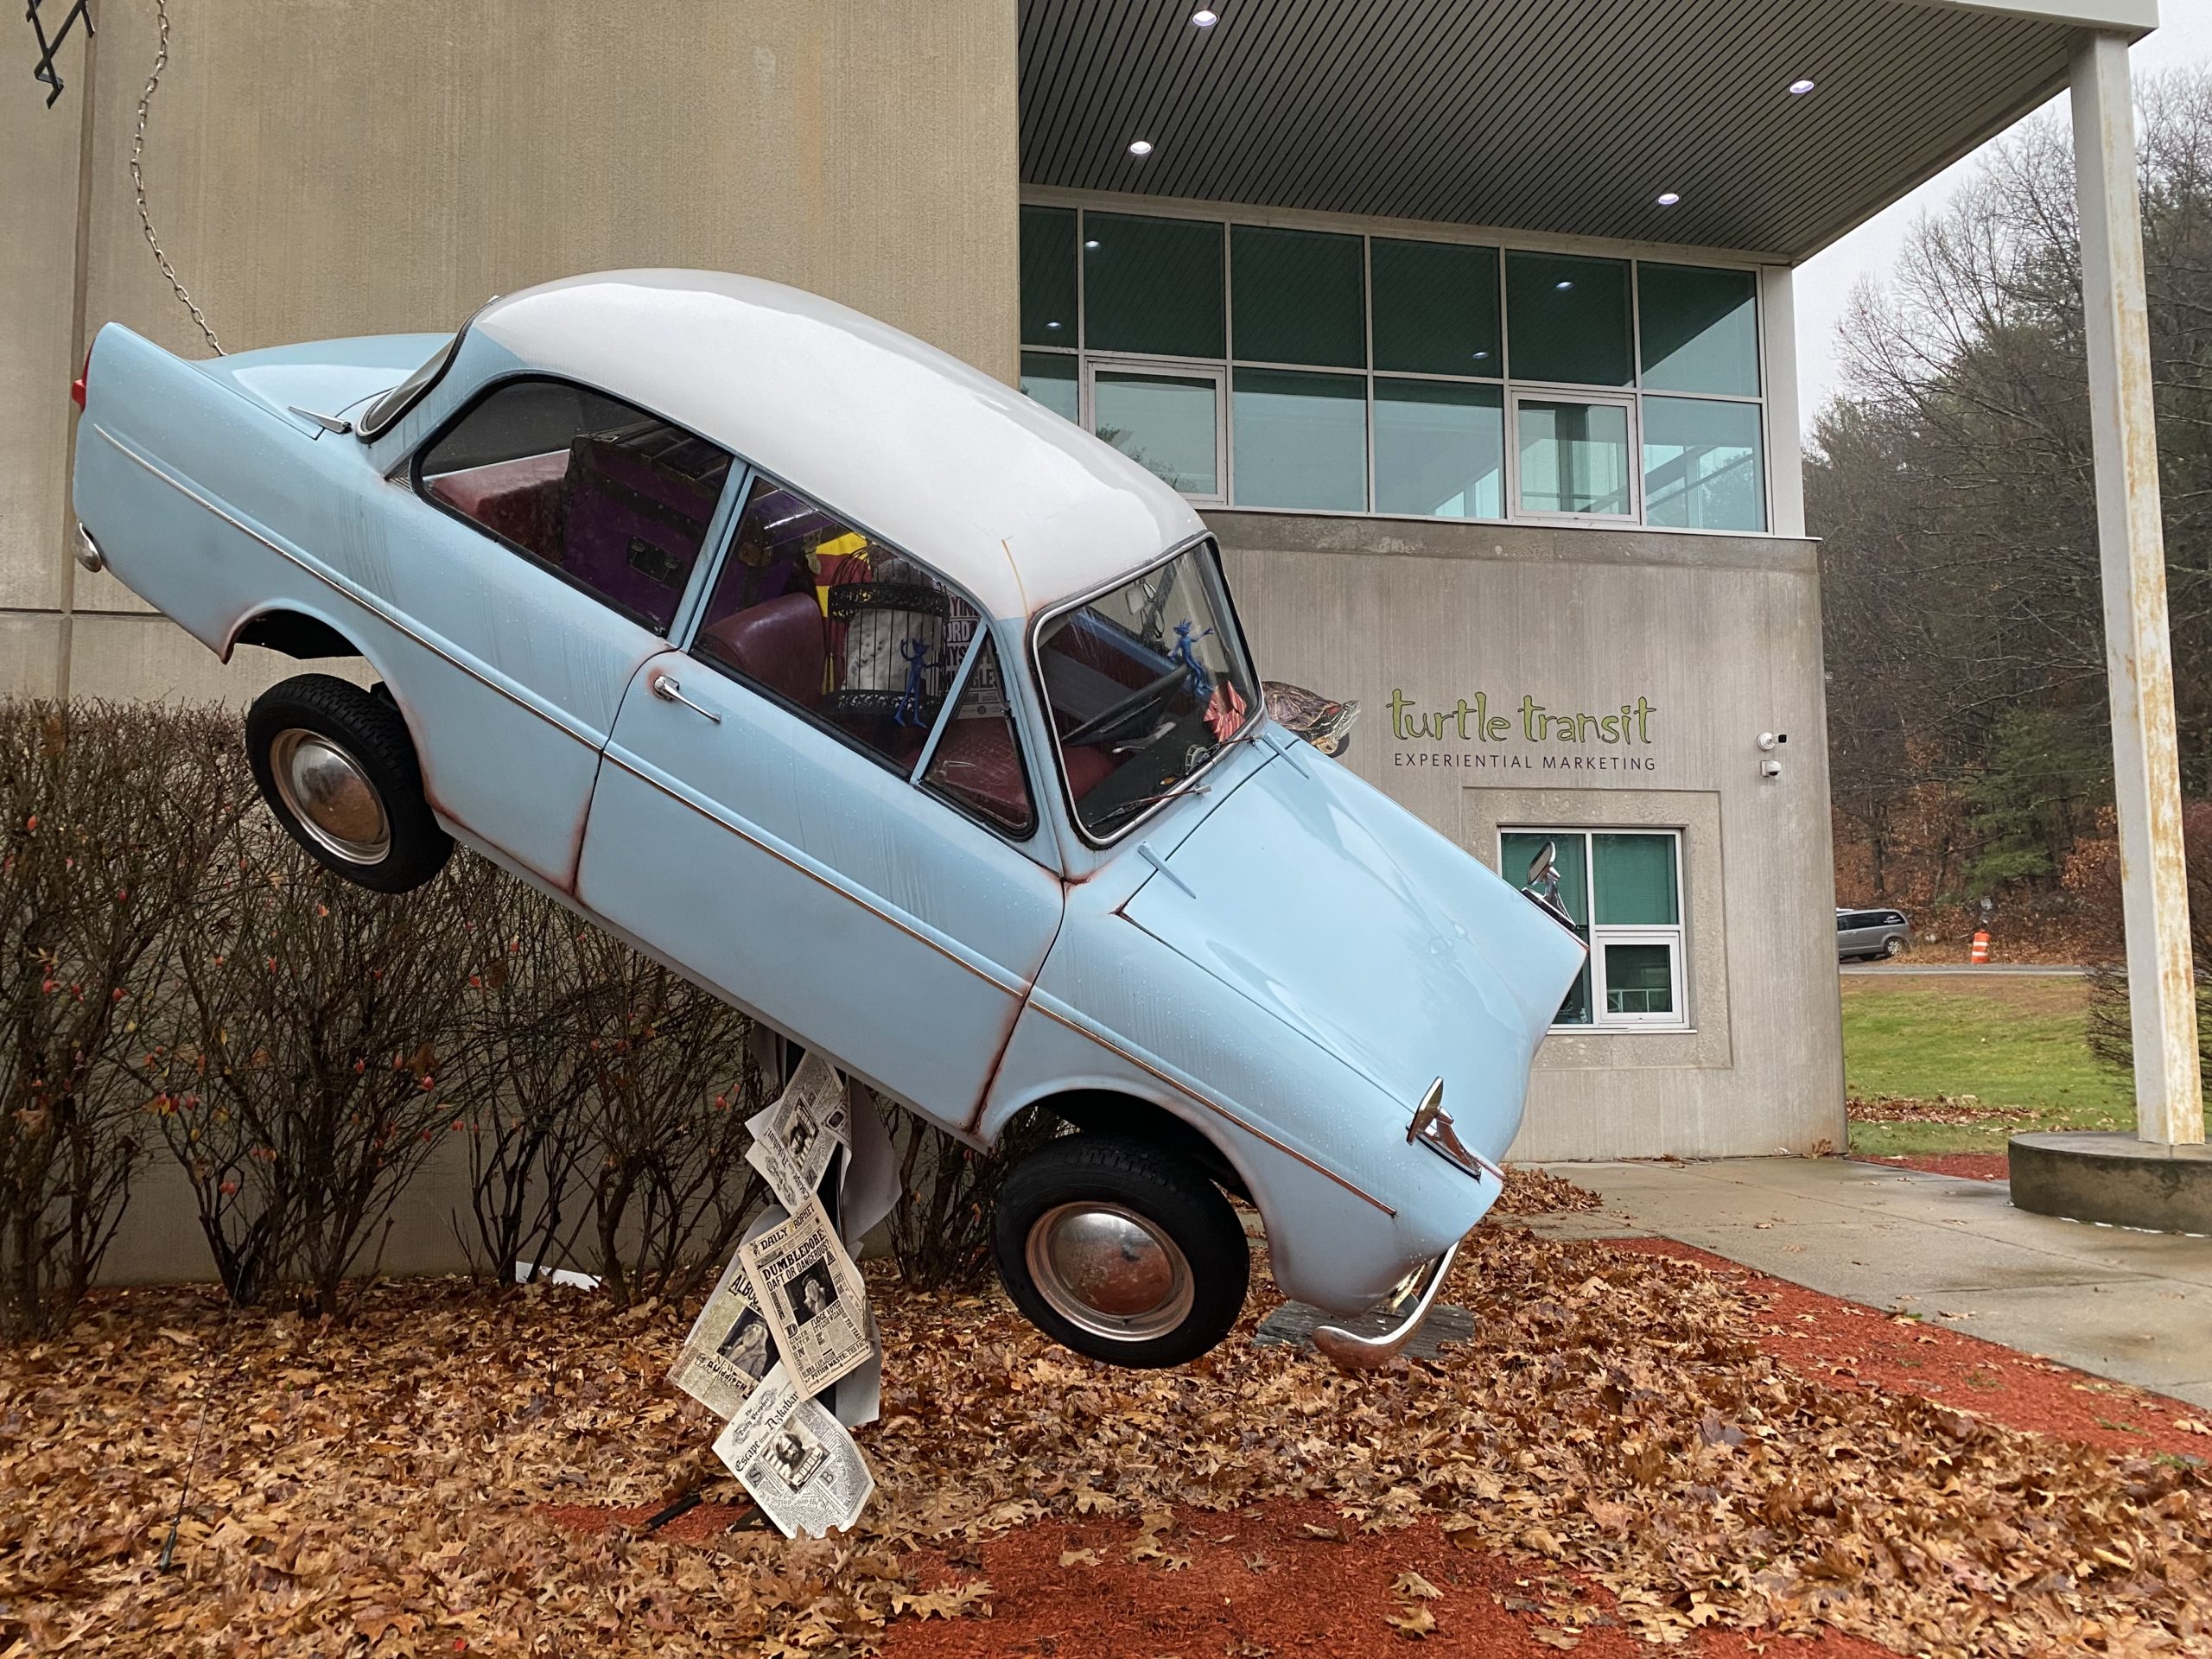 A light-blue vintage Ford Anglia fabricated to resembl e the flying car from the Harry Potter movies is on display in front of the Turtle Transit headquarters in Massachusetts.